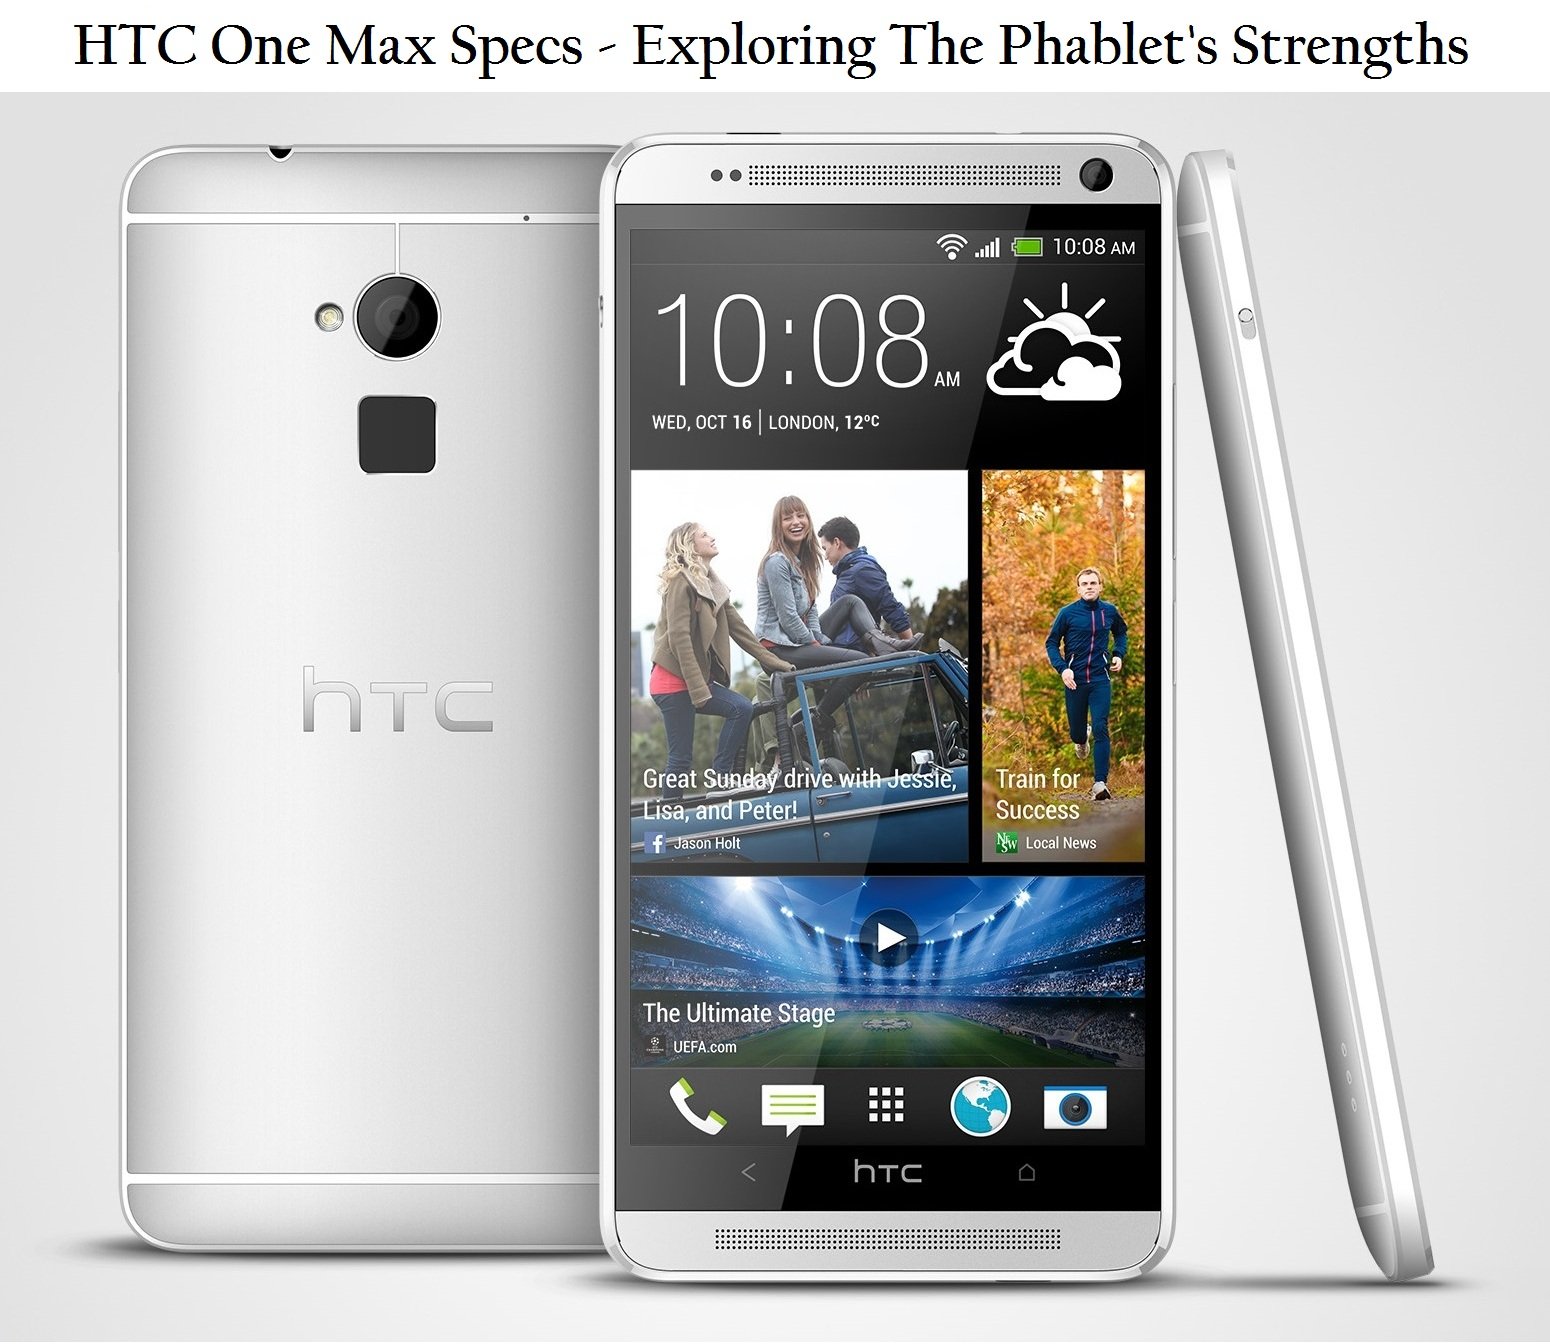 HTC One Max Specs – Exploring The Phablet’s Strengths